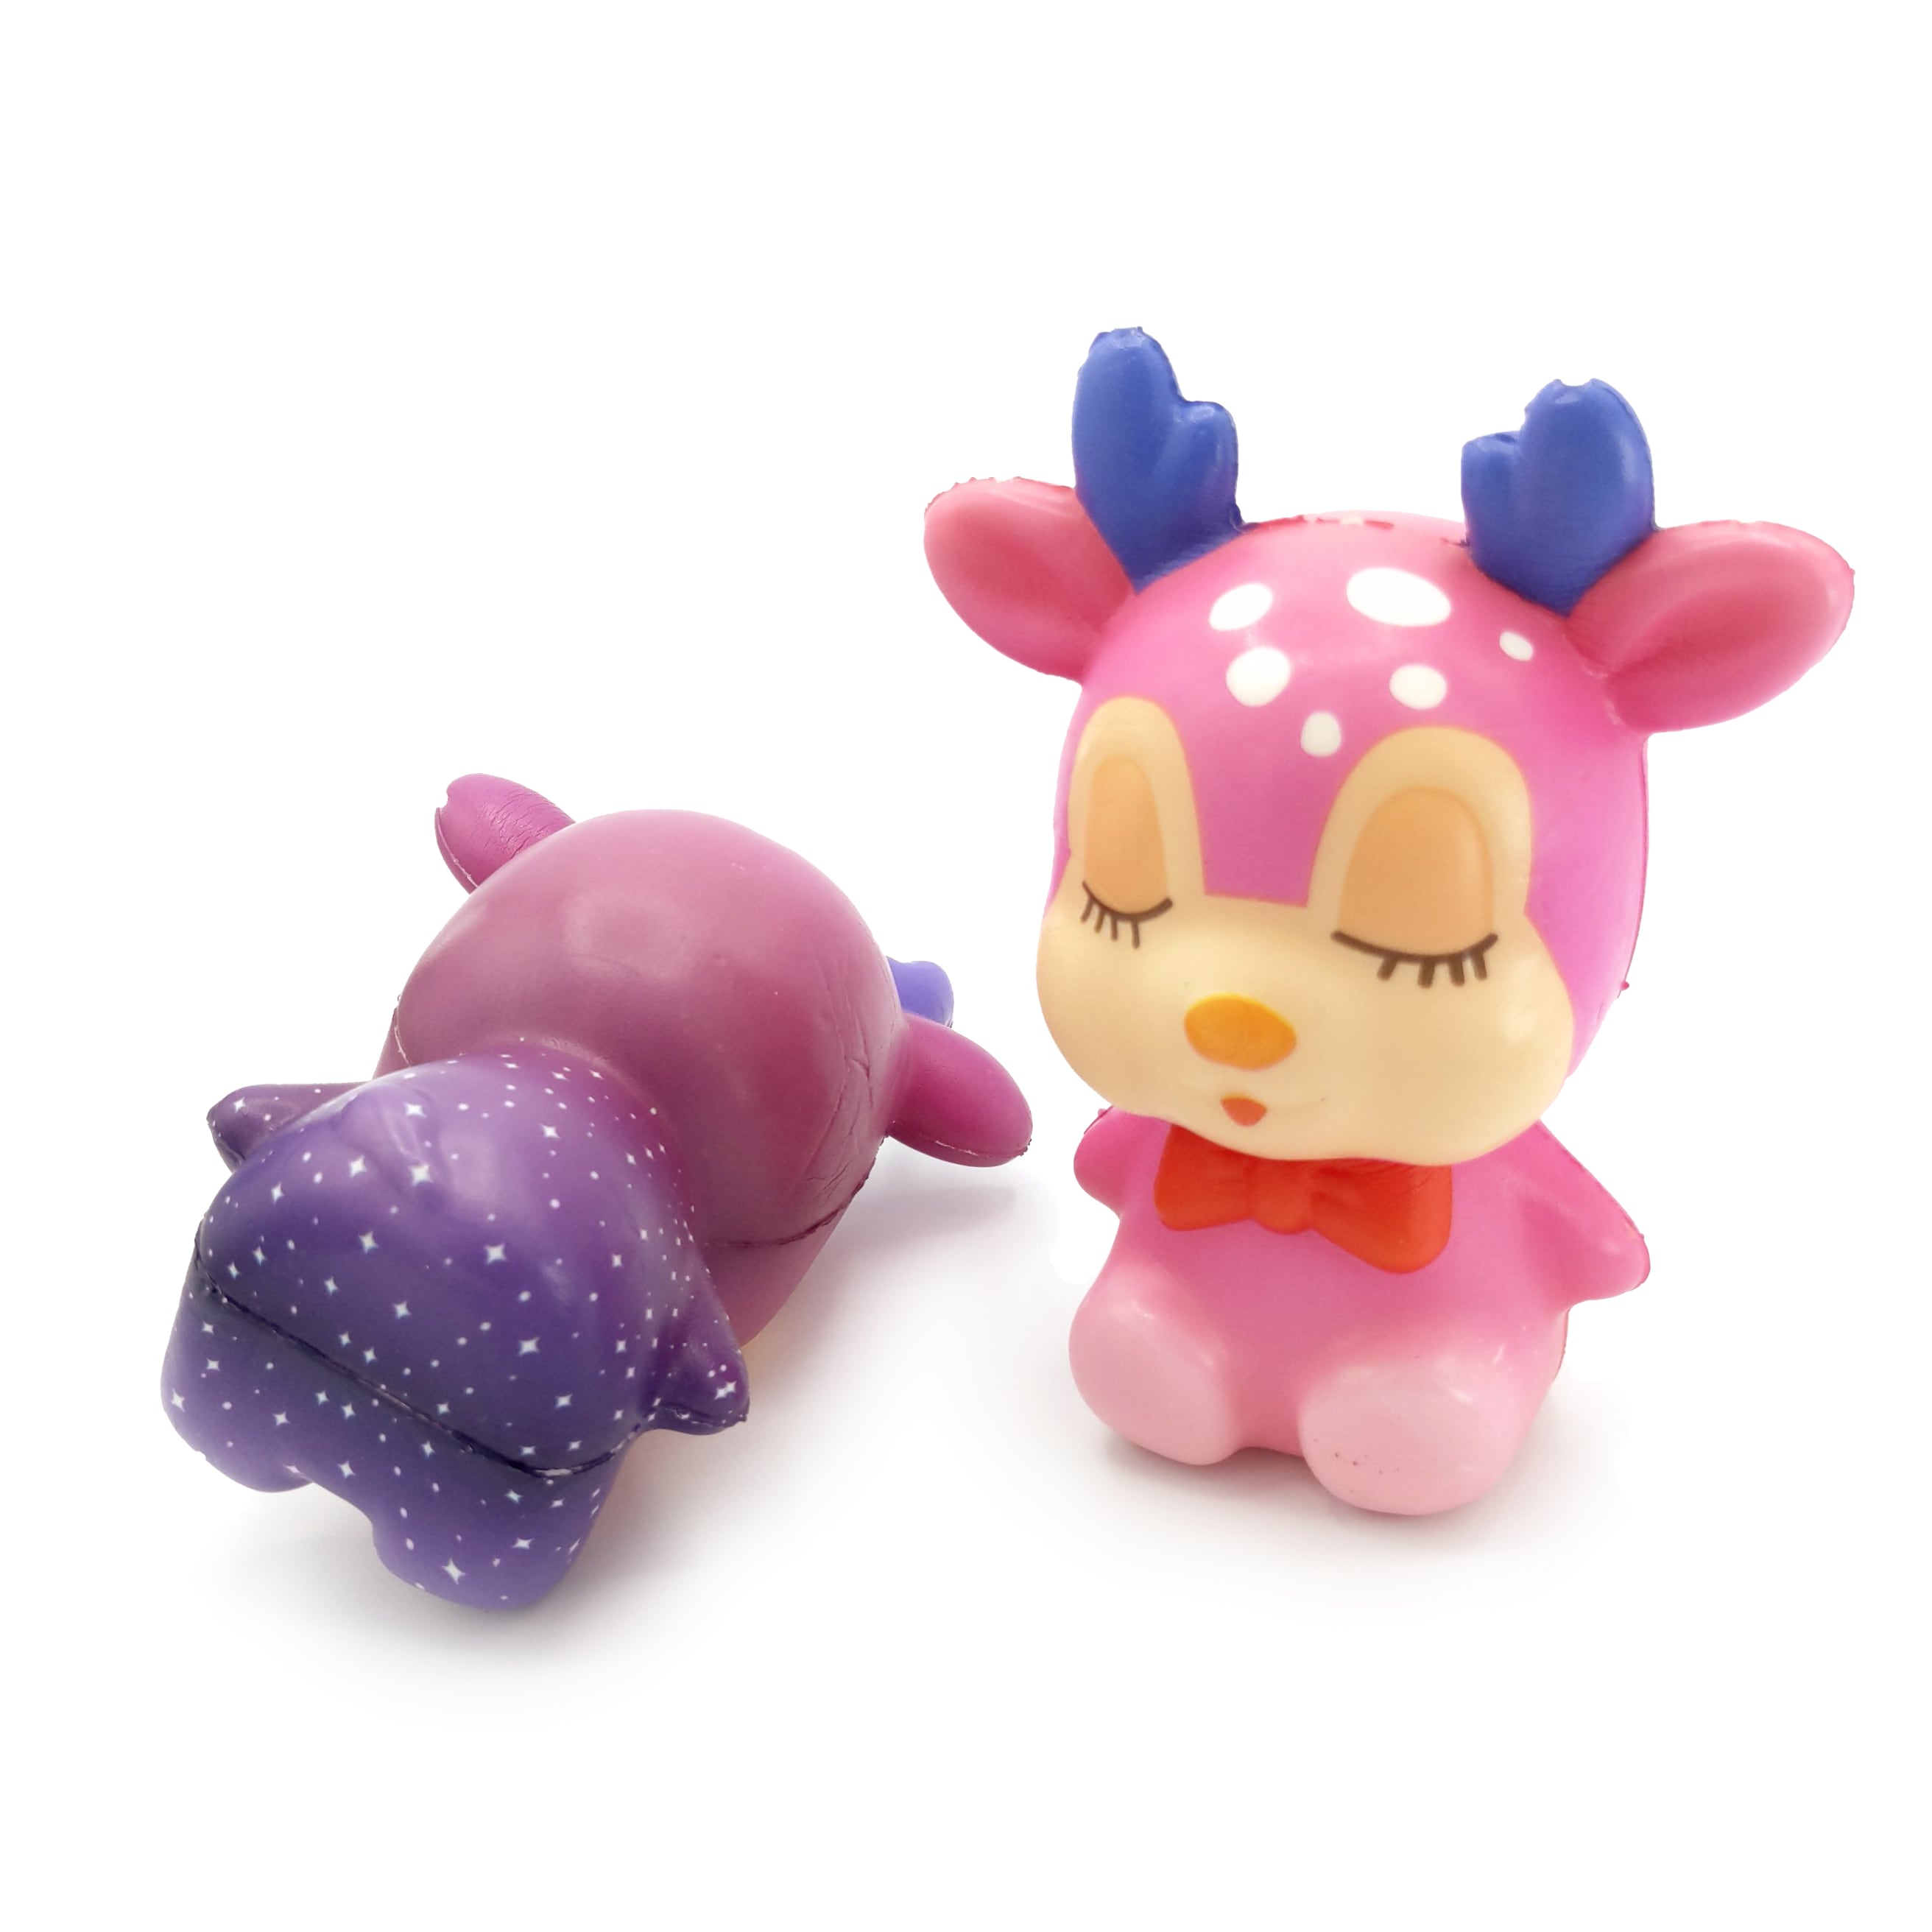 #10091 12Pcs Cute Sika Deer Soft Slow Rising Squishy Squeeze Toy in 4 Adorable Colors